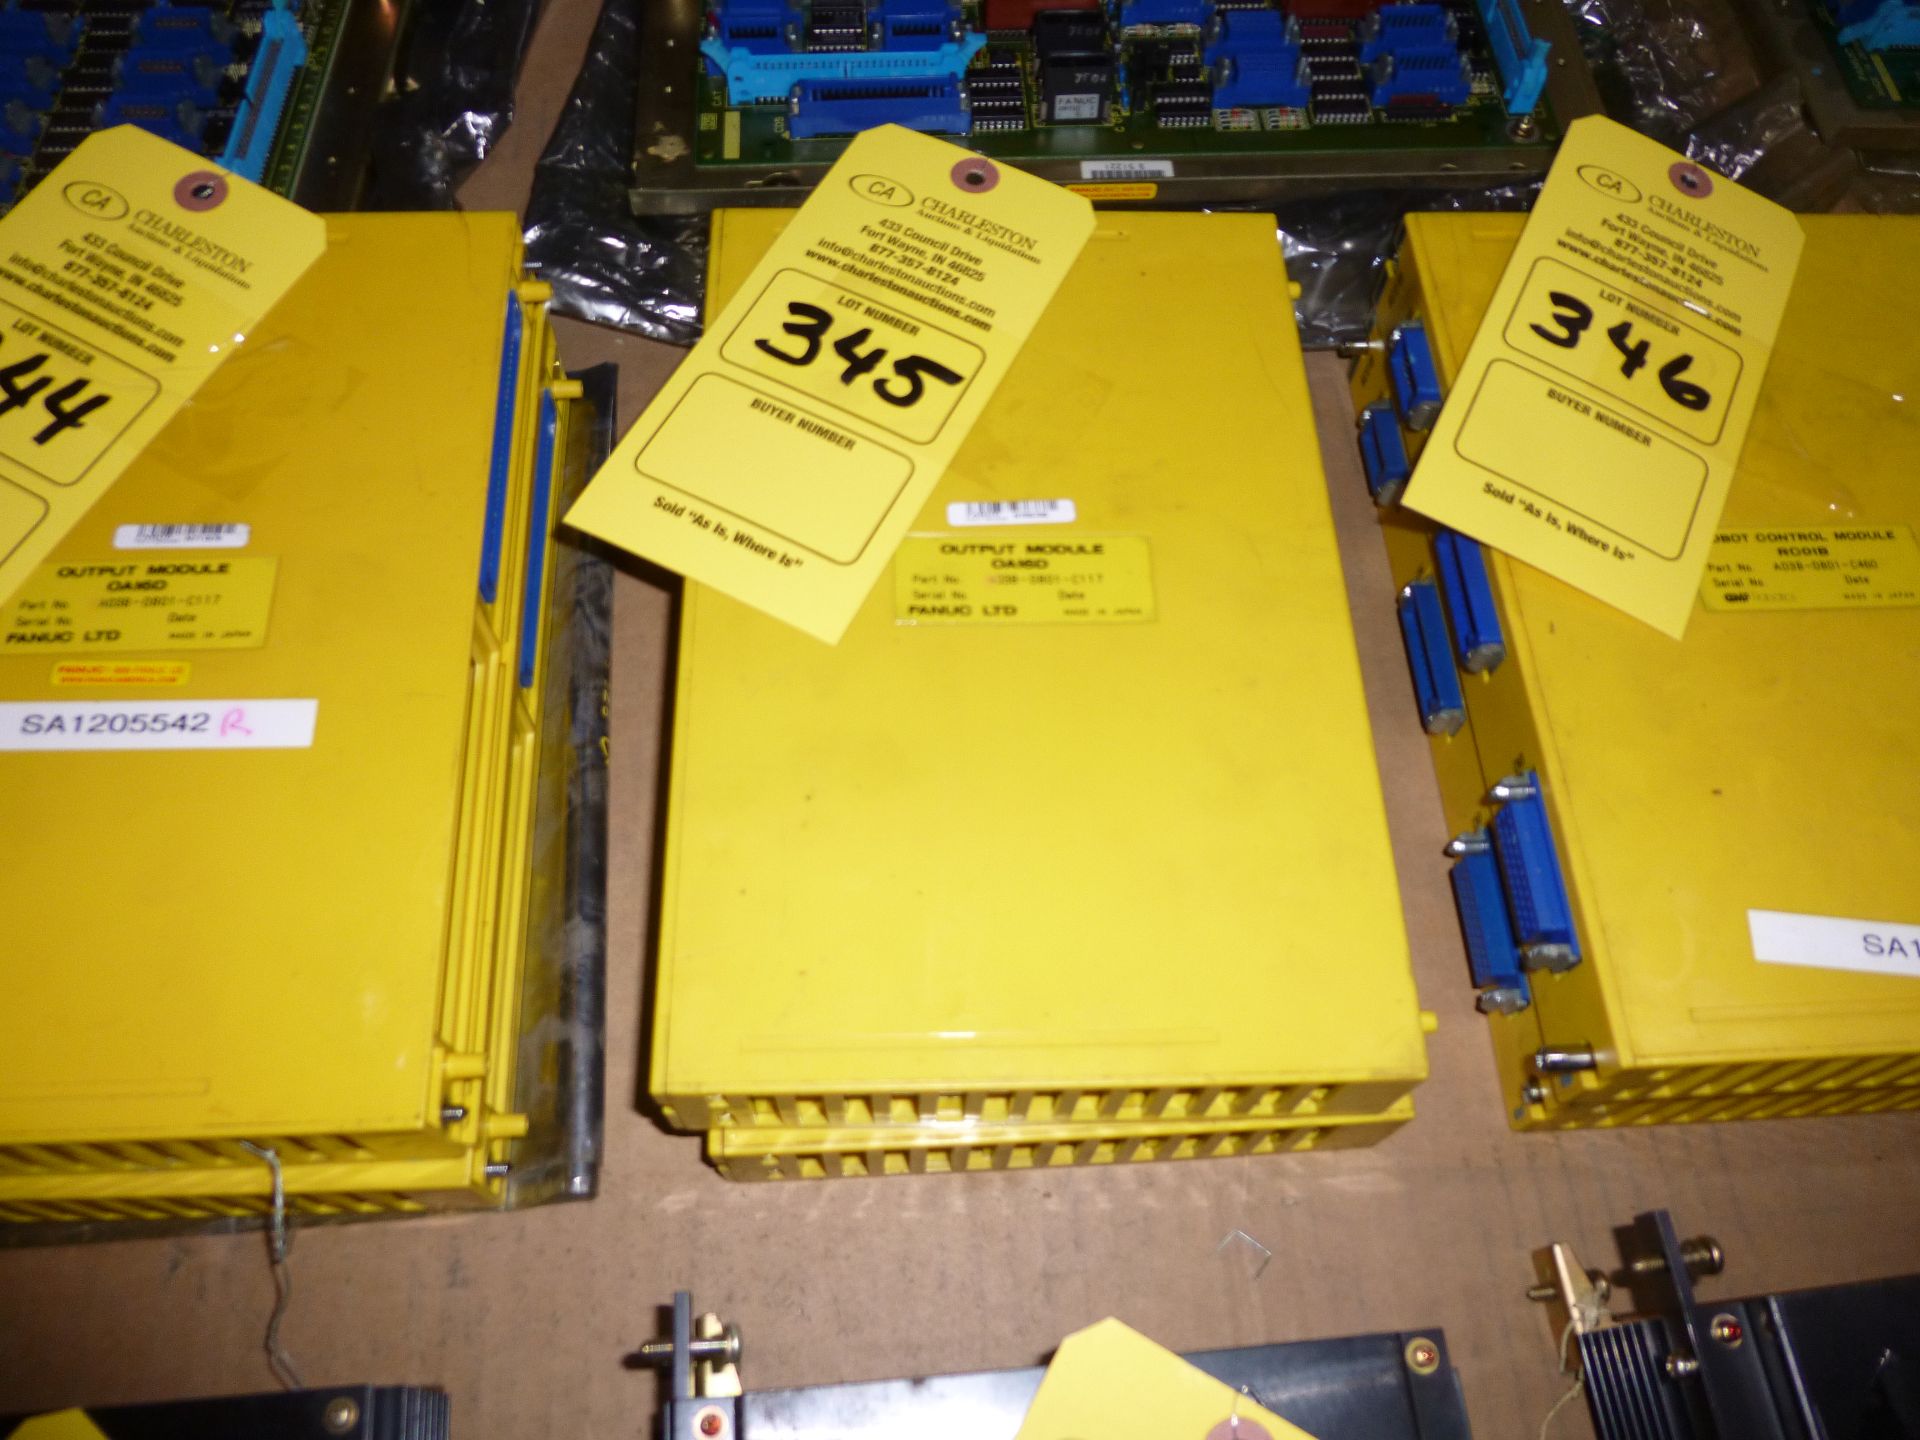 Qty 2 Fanuc output module model A03B-0801-C115, as always with Brolyn LLC auctions, all lots can